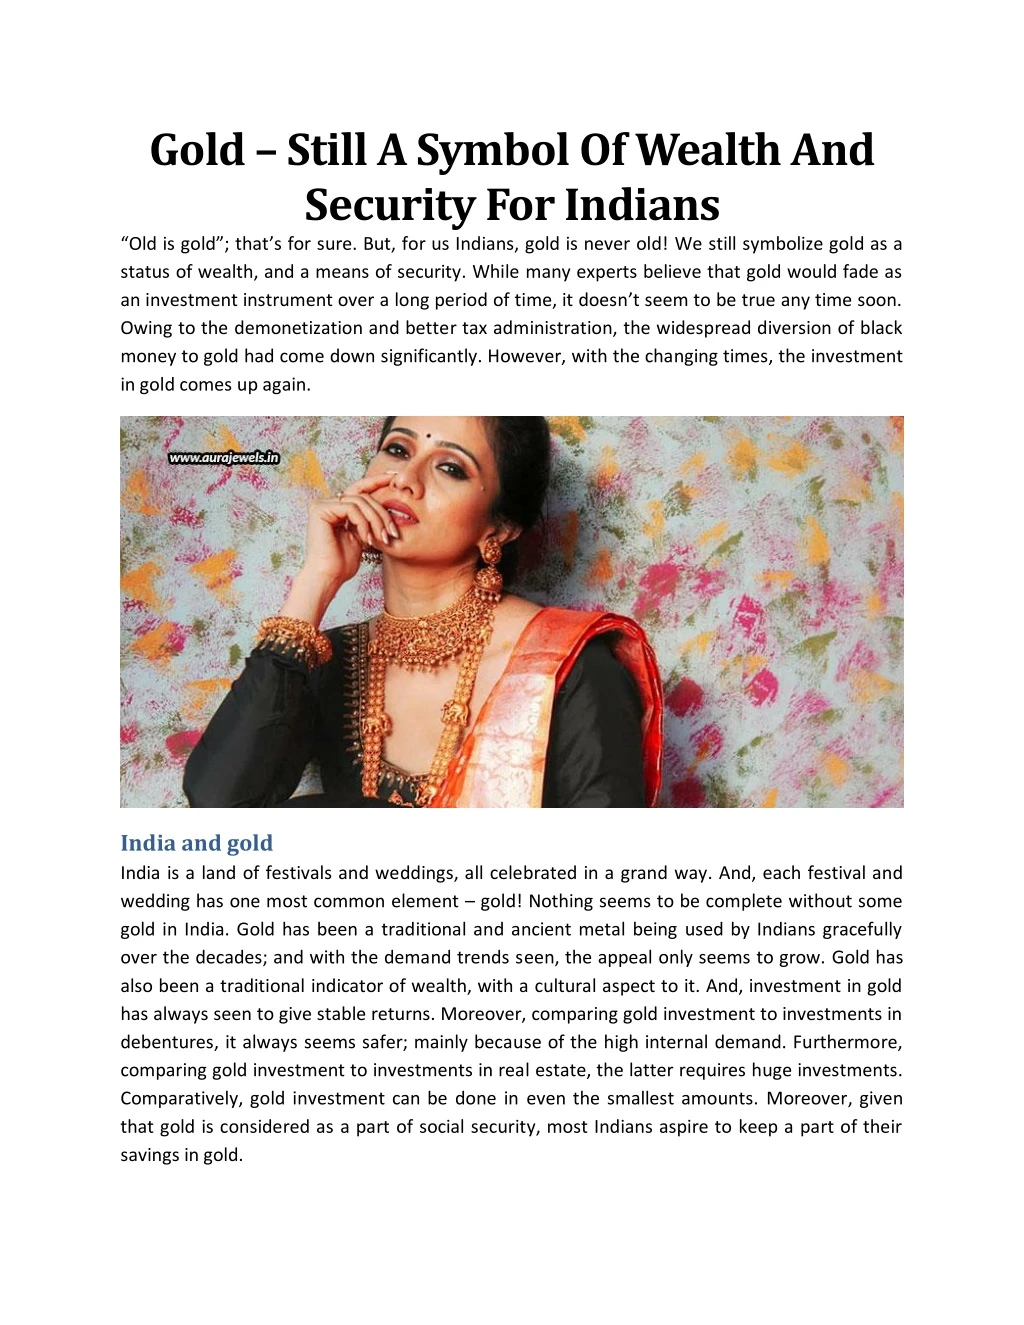 gold still a symbol of wealth and security